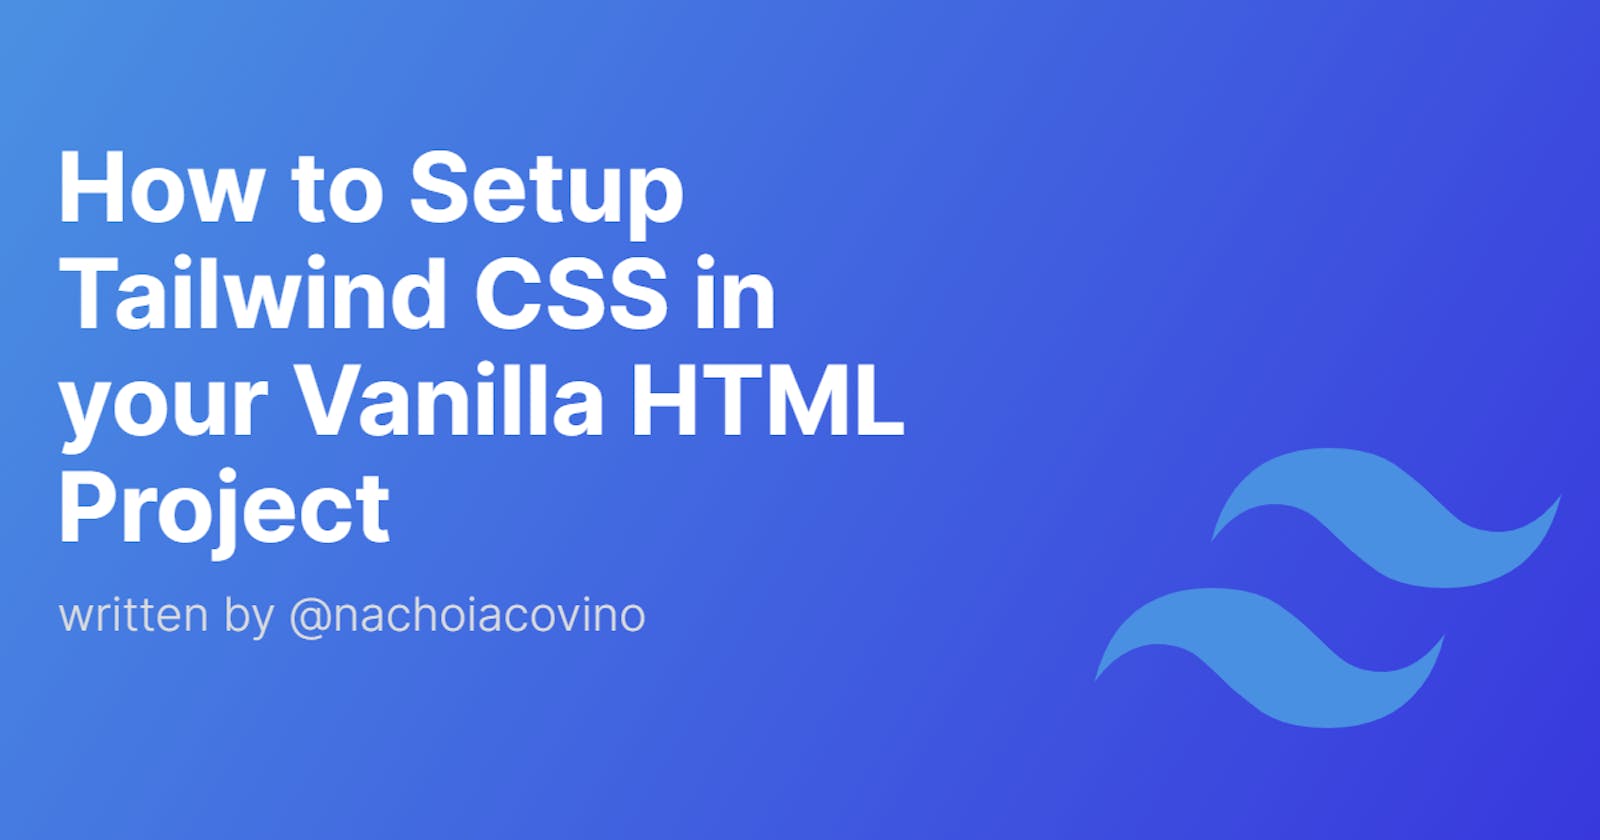 How to Setup Tailwind CSS in your Vanilla HTML Project